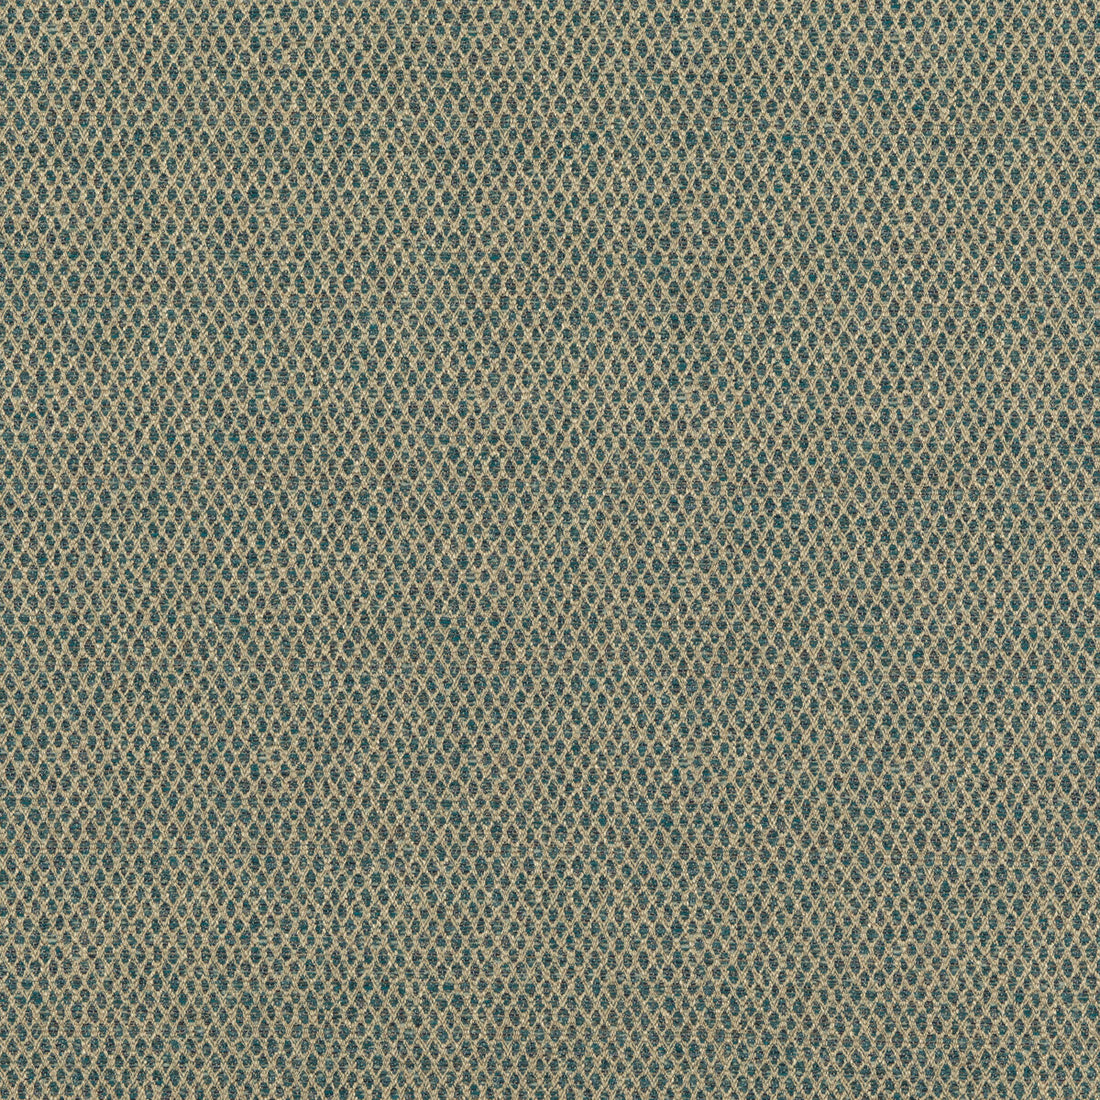 Pednor fabric in teal color - pattern BF10874.615.0 - by G P &amp; J Baker in the Essential Colours II collection